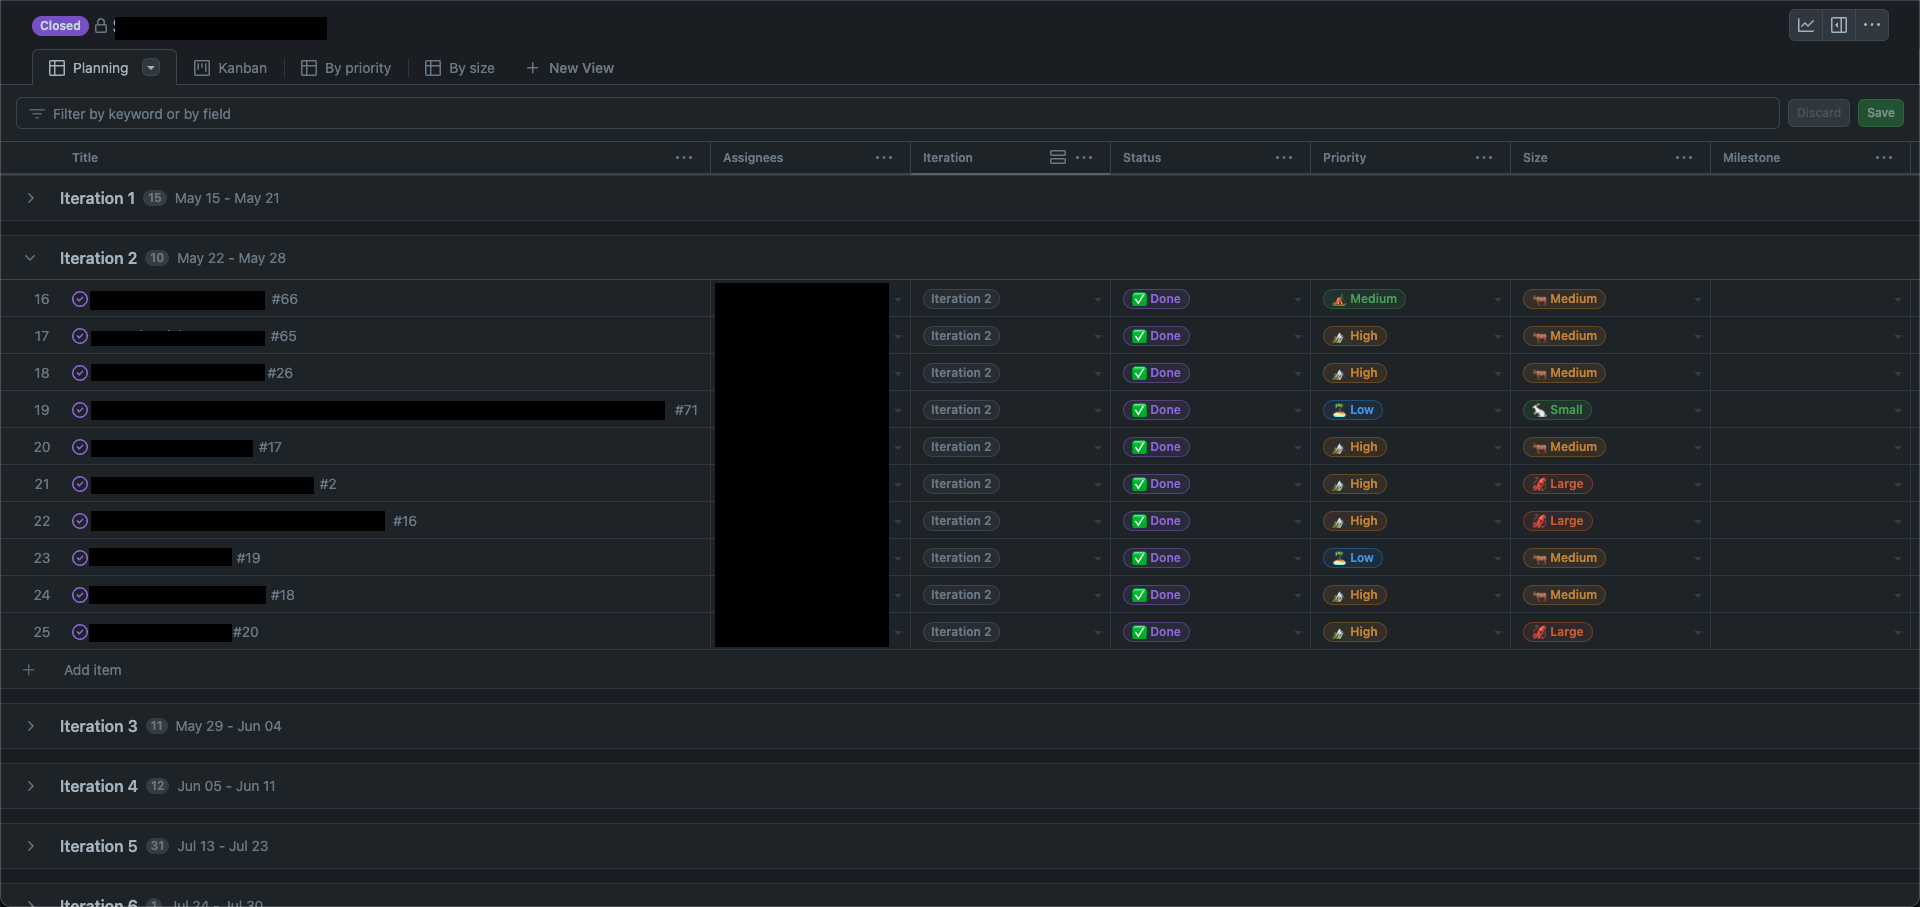 Screenshot of GitHub Project with 5 iterations and additional metadata for priority and size